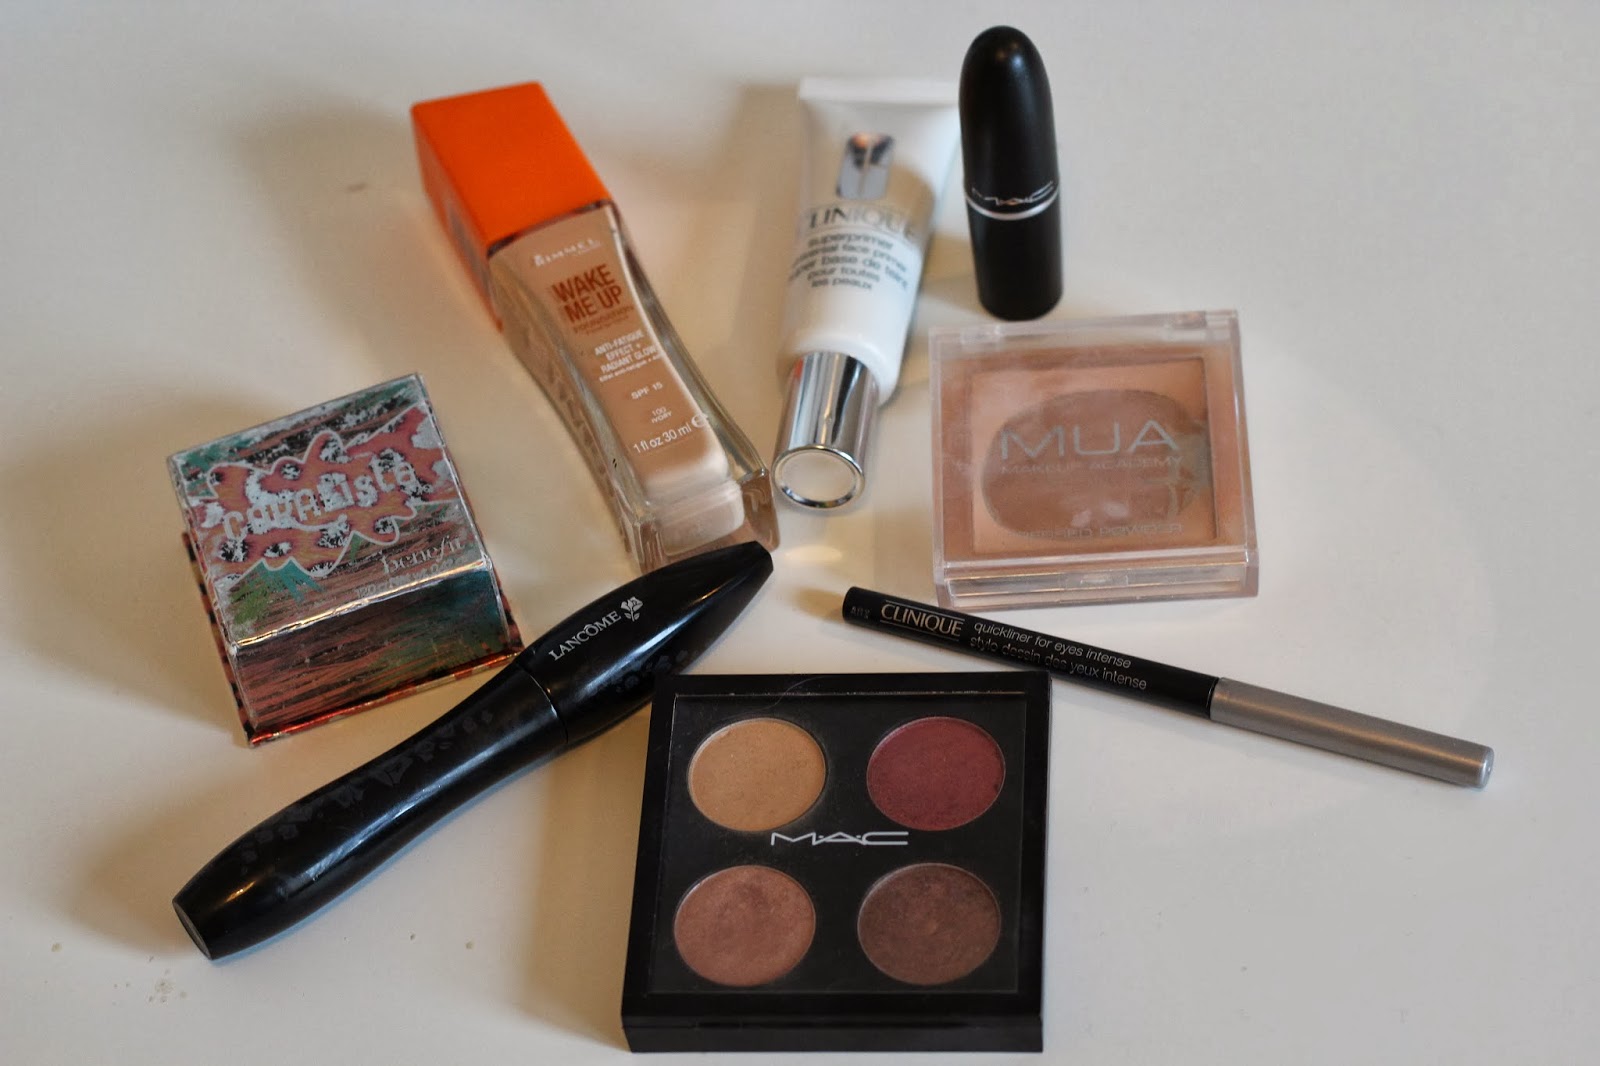 products include rimmel mac clinique and mua